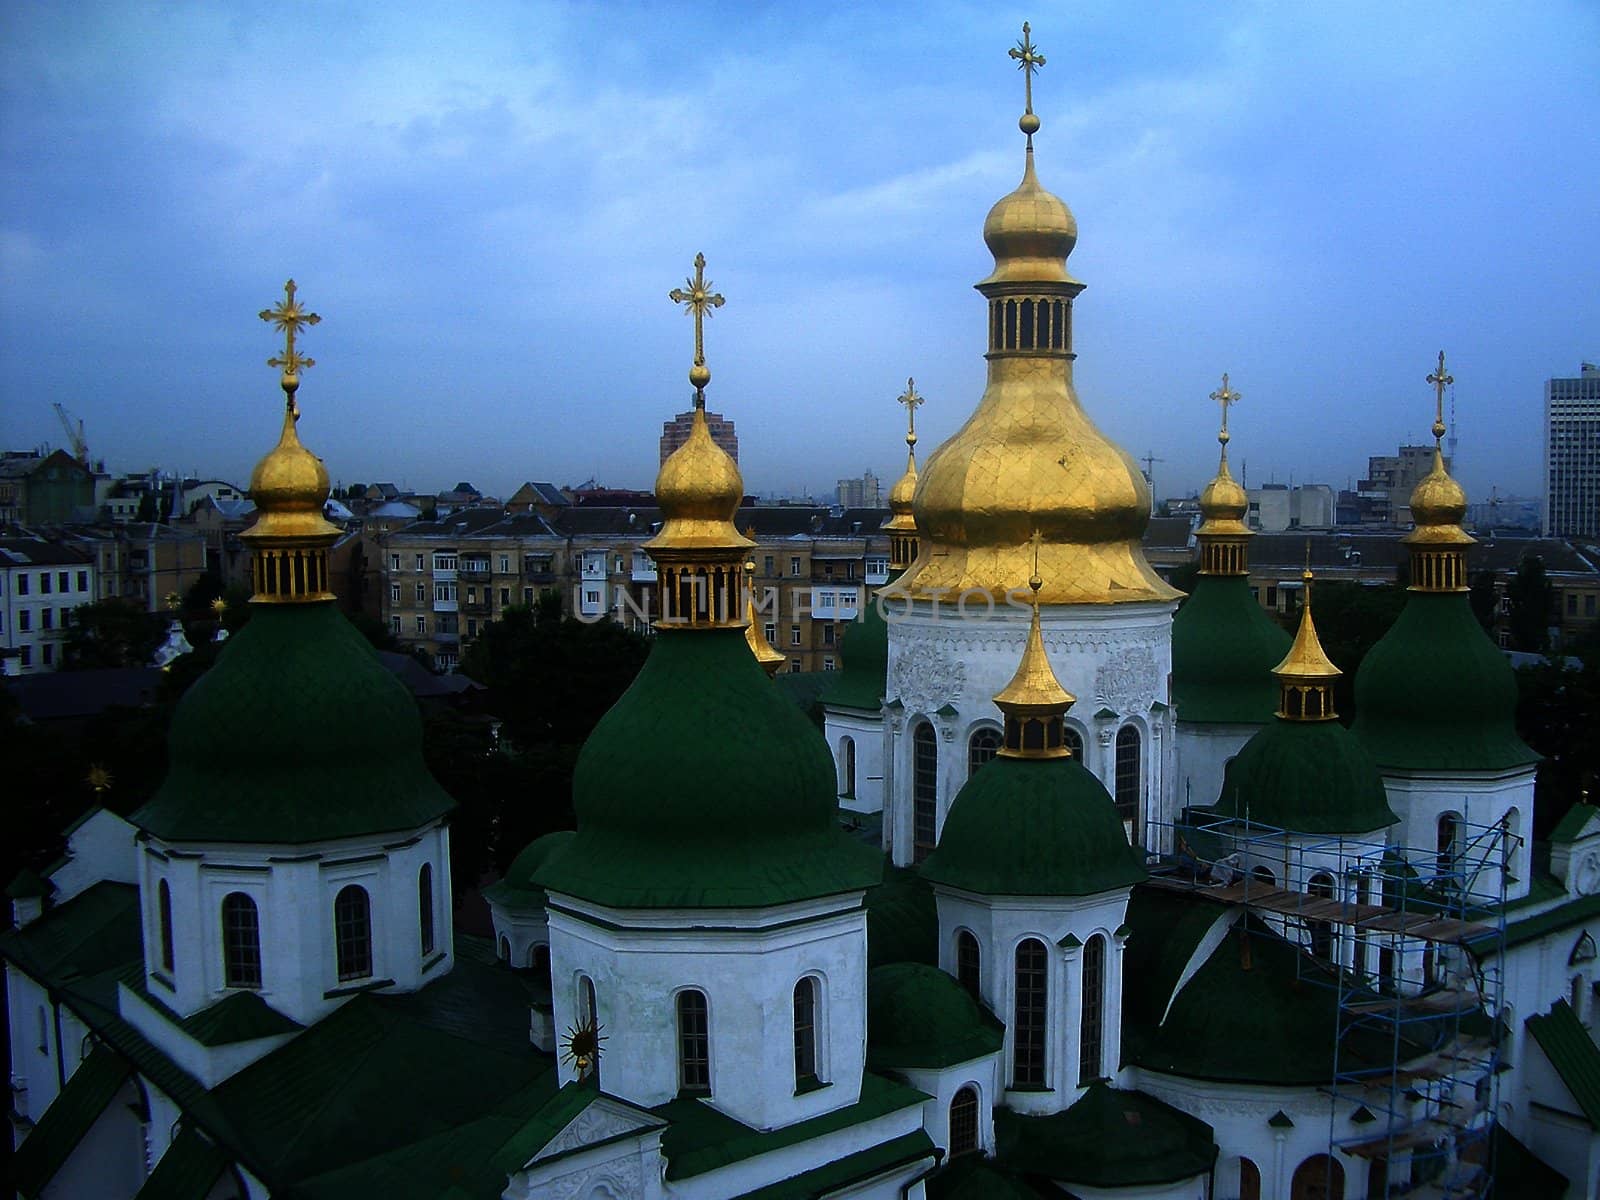 Green and golden domes of St. Sophia's Cathedral in Kiev, Ukraine by marcorubino